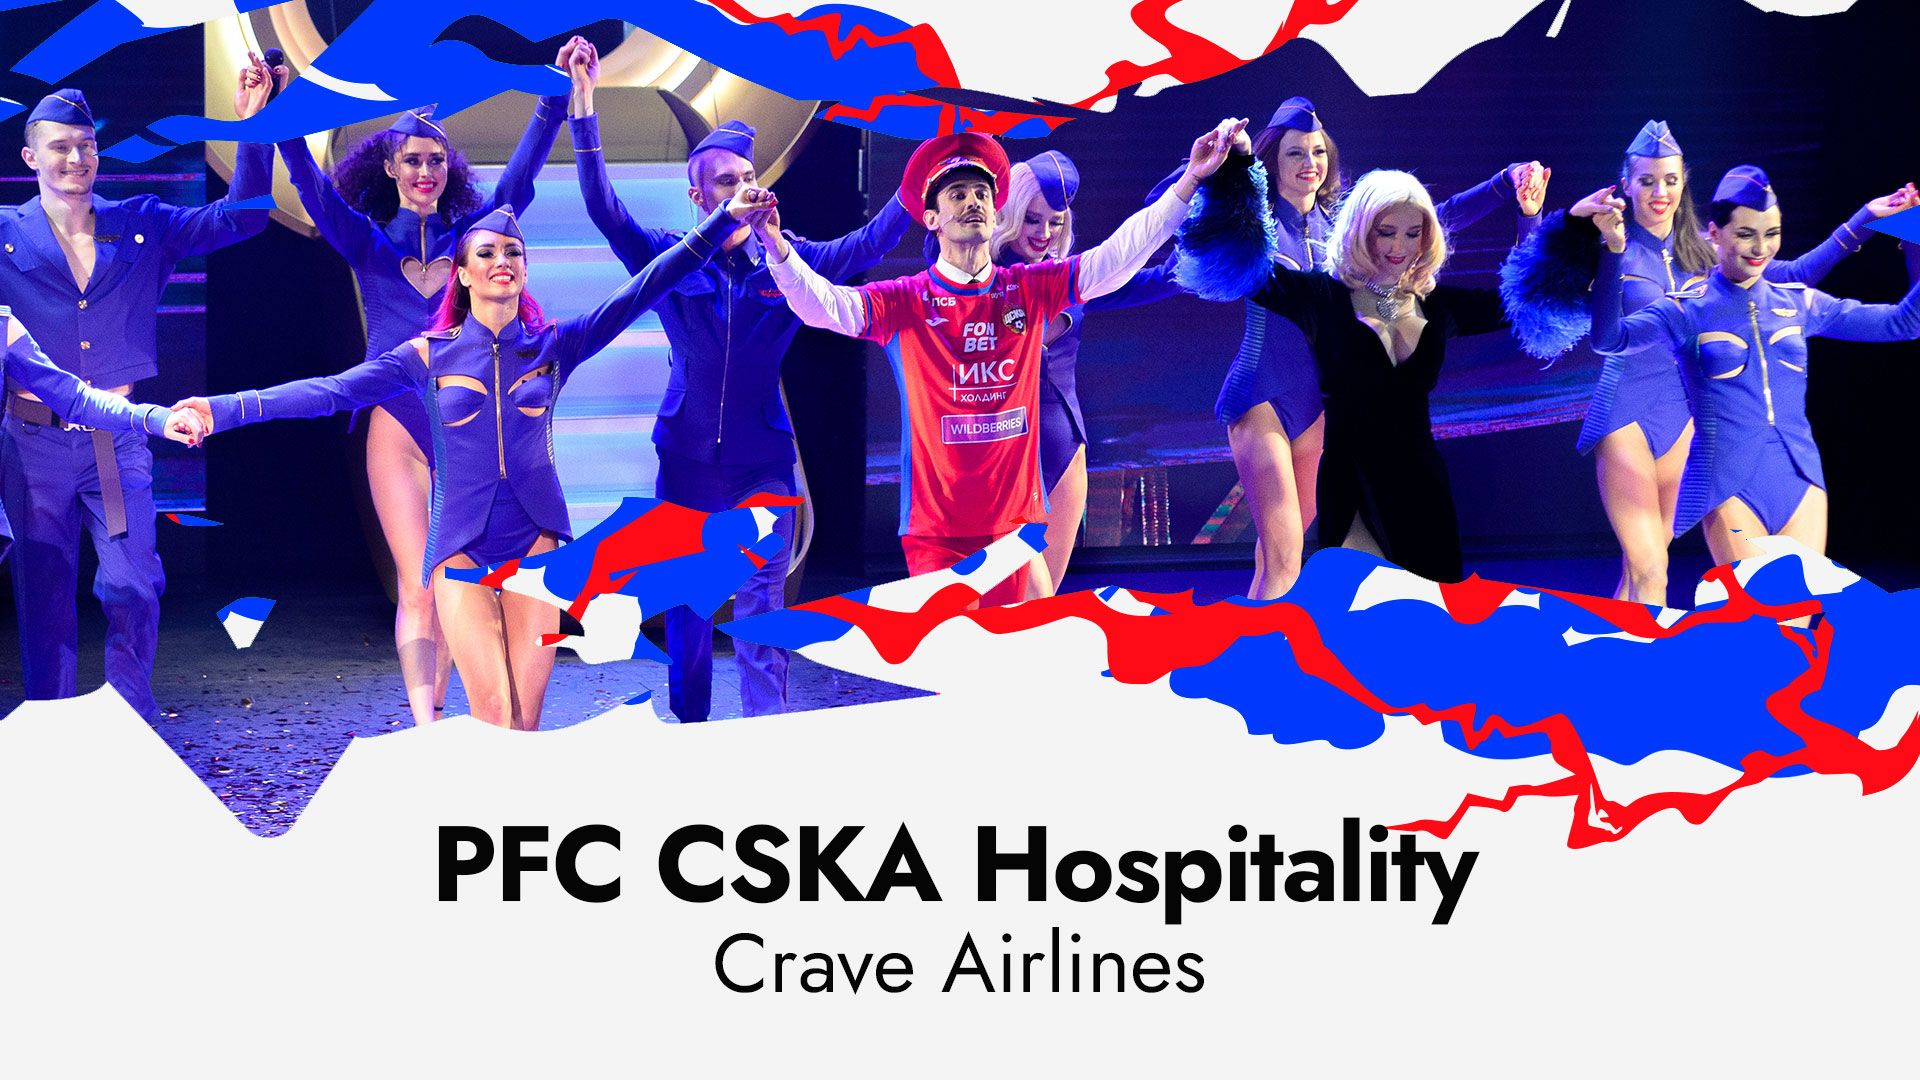 Crave airlines